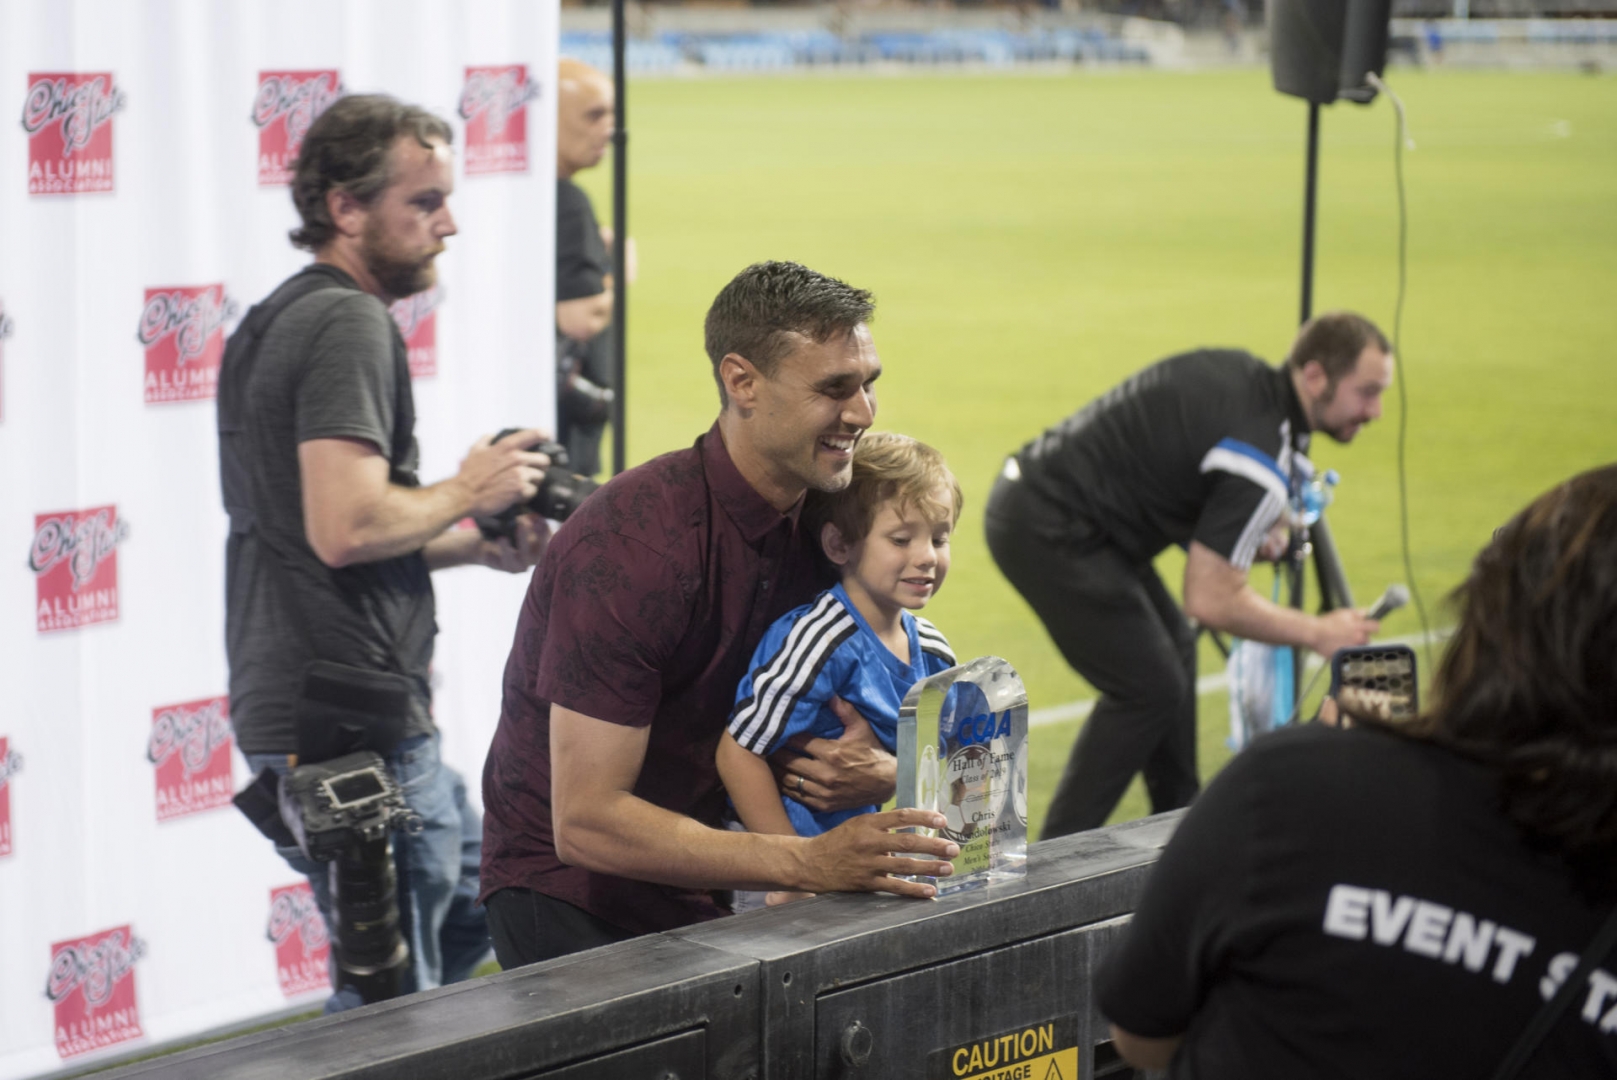 Chris Wondolowski takes time to pose for photos with a young fan.